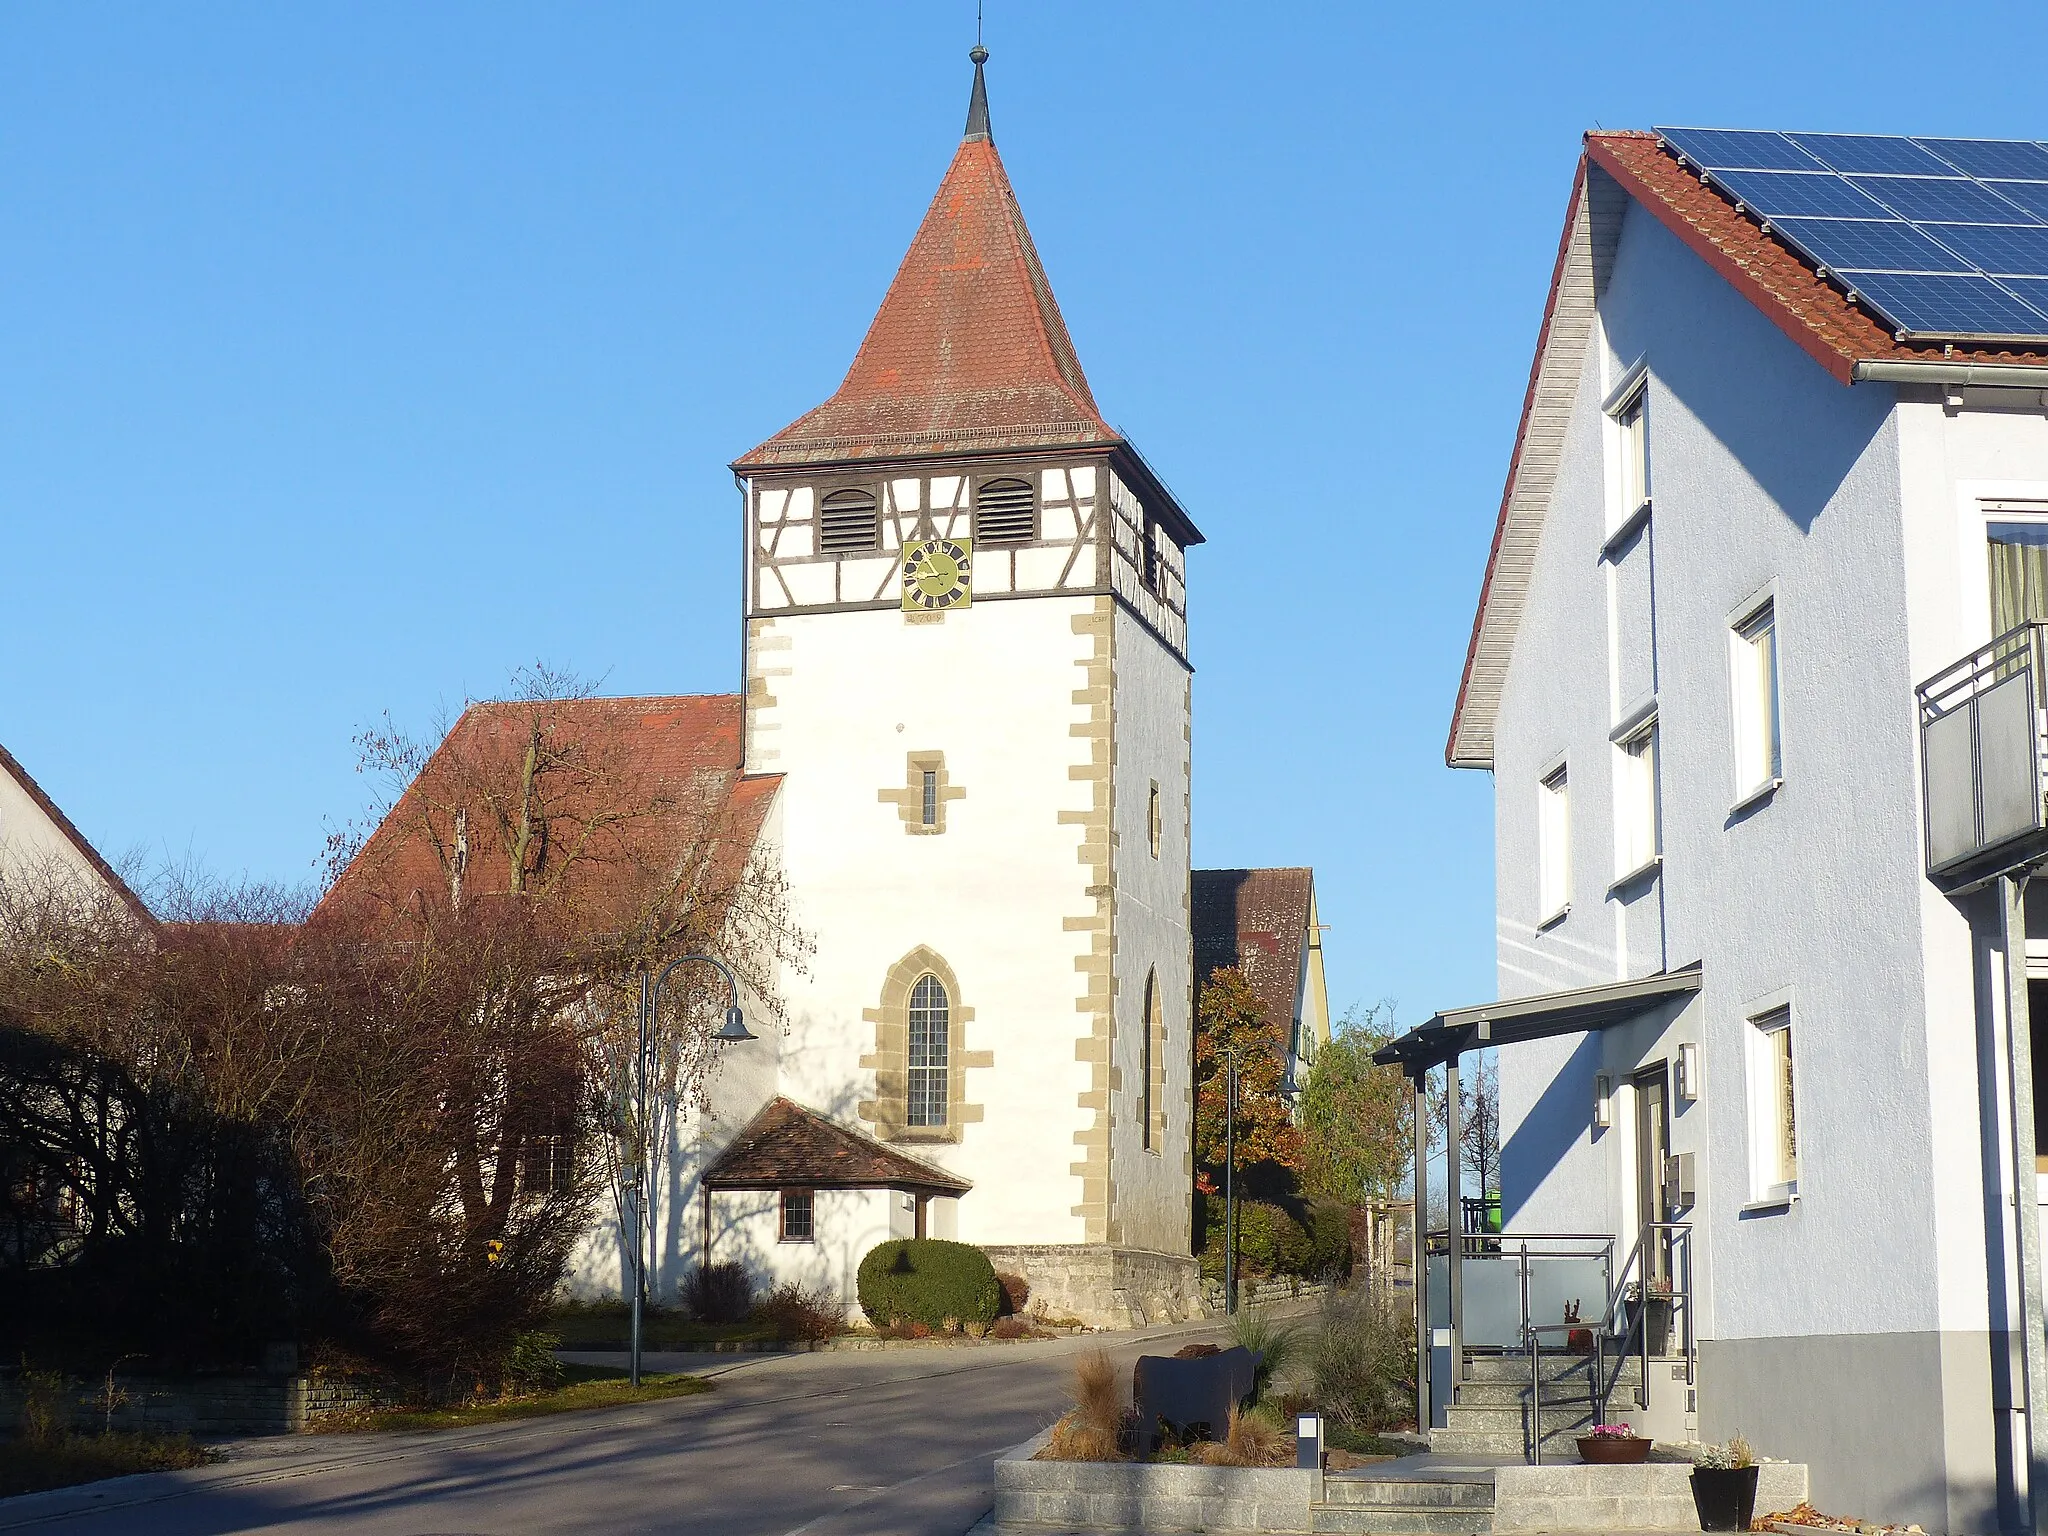 Photo showing: The village Bronnholzheim, part of the municipality of Satteldorf